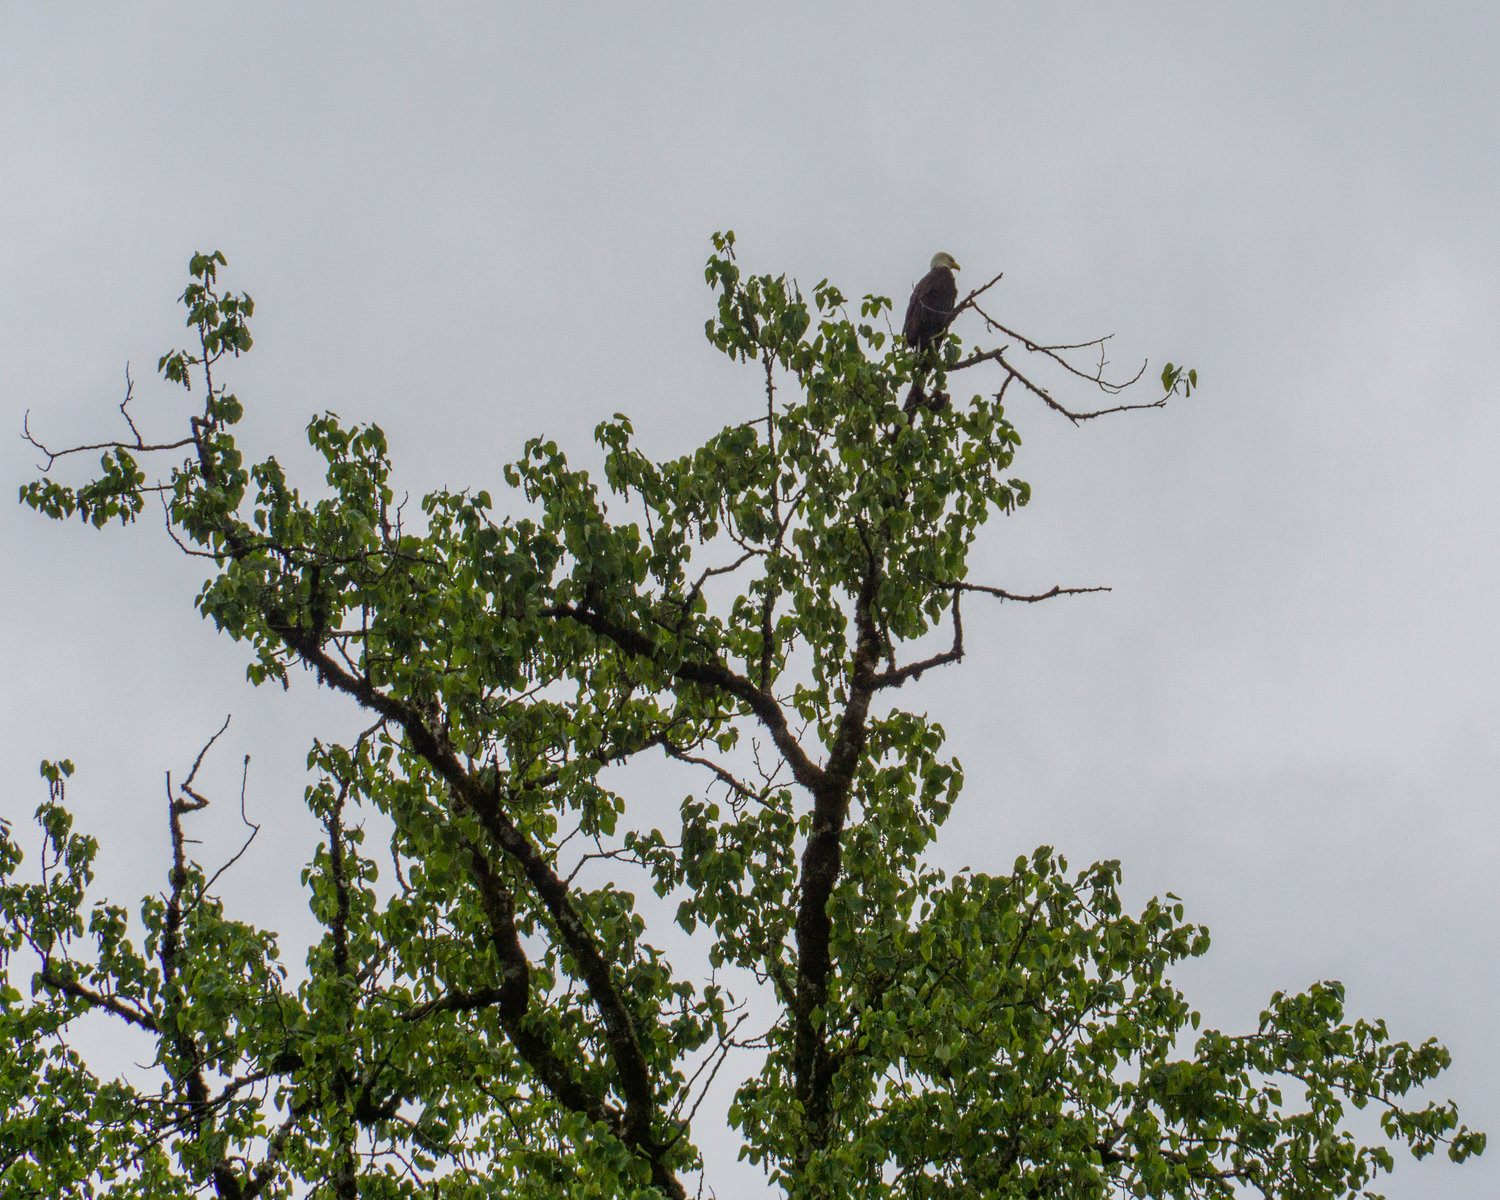 An eagle perches on top of a tree over the Chehalis River.